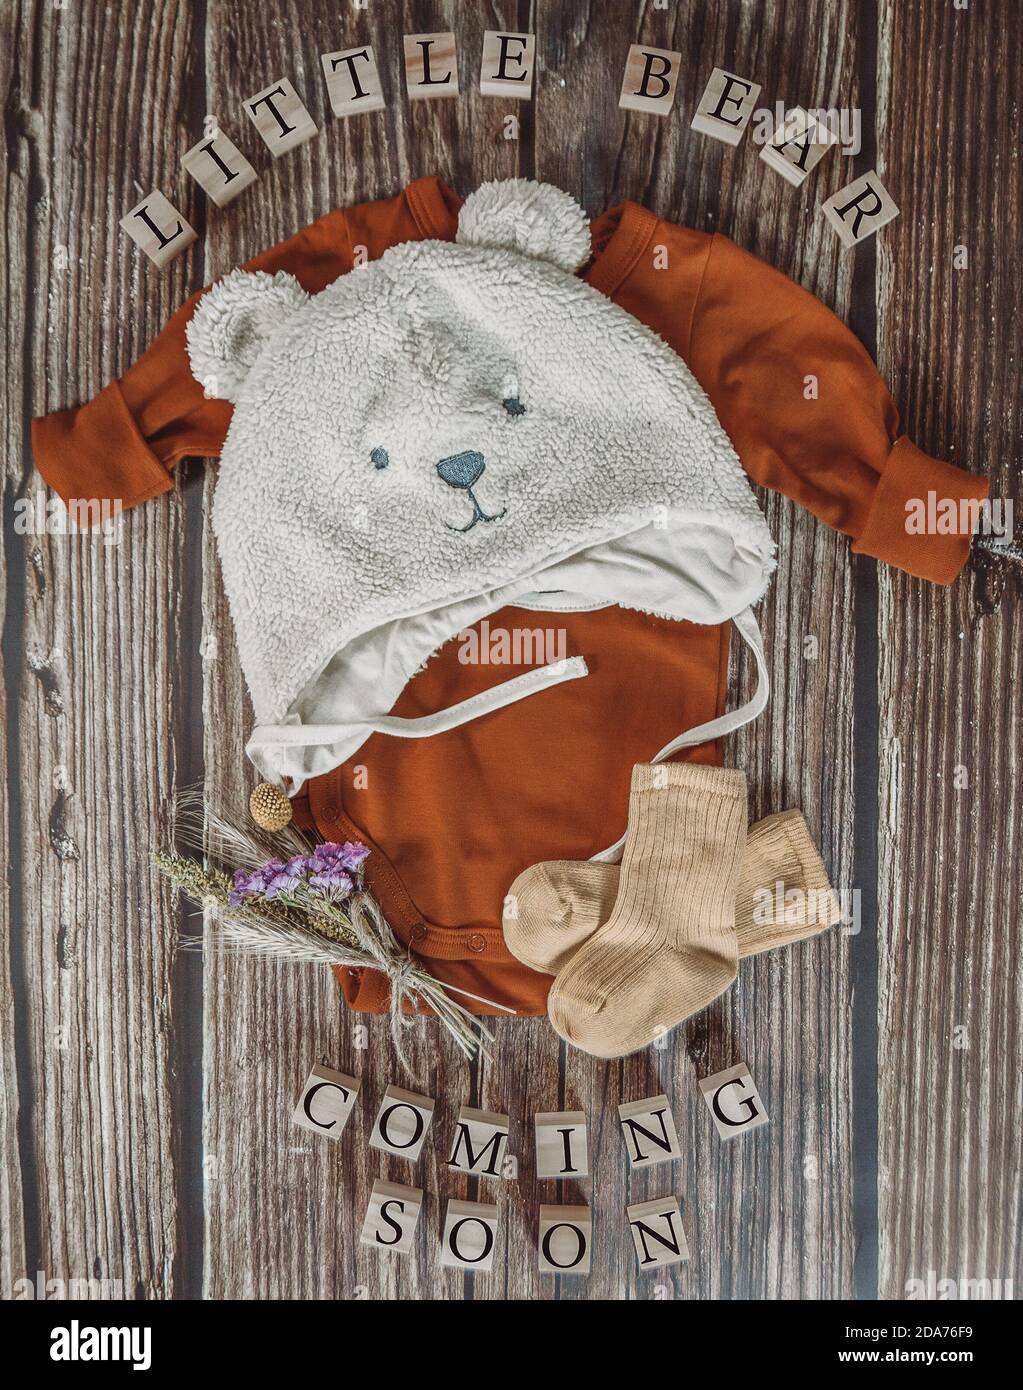 Little Bear Coming Soon. Baby announcement composition on a rustic wooden background. Rustic baby Coming Soon concept. Stock Photo